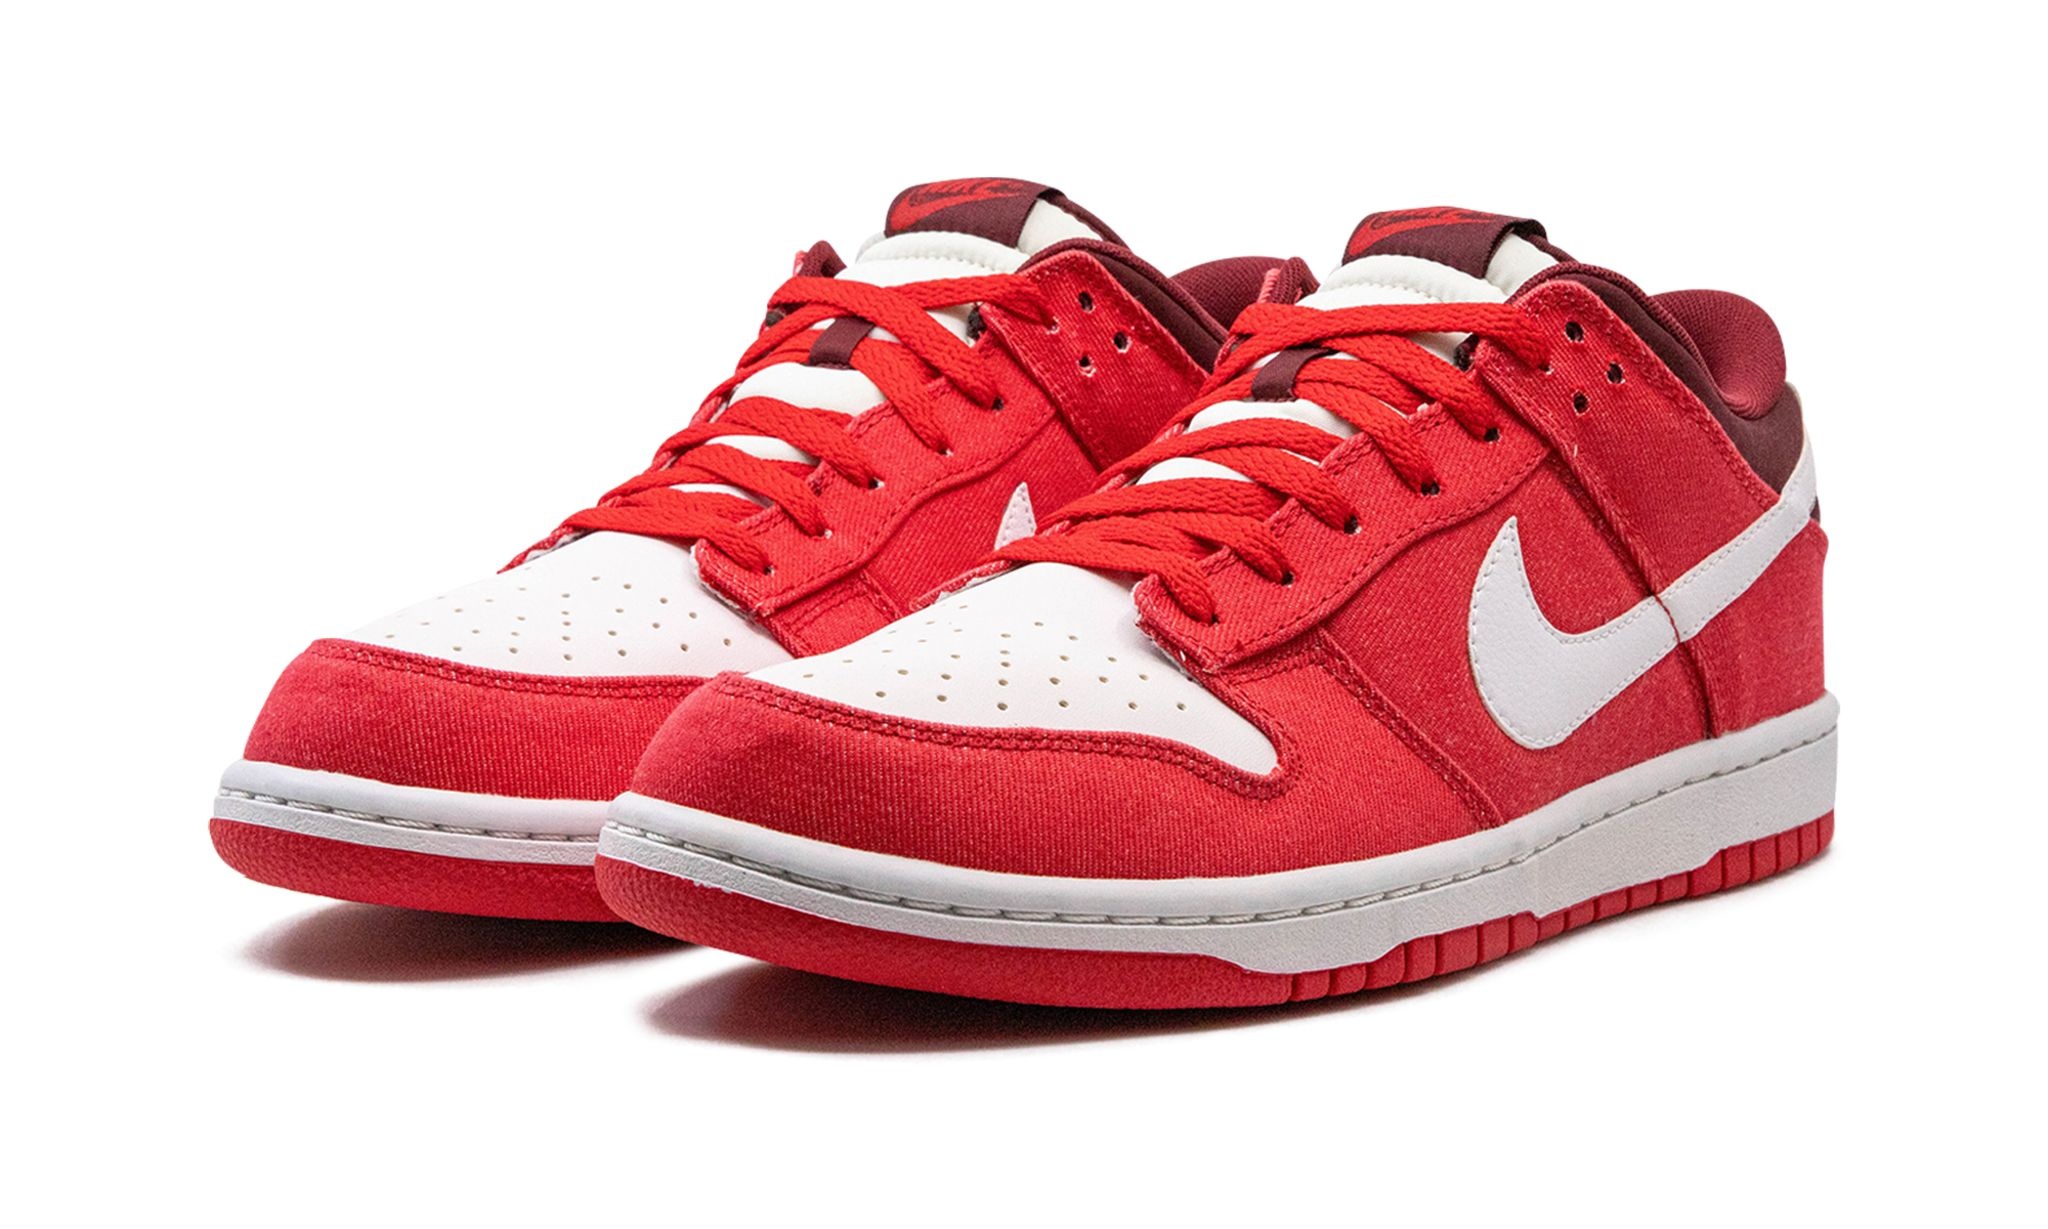 Dunk Low "Hyper Red" - 2